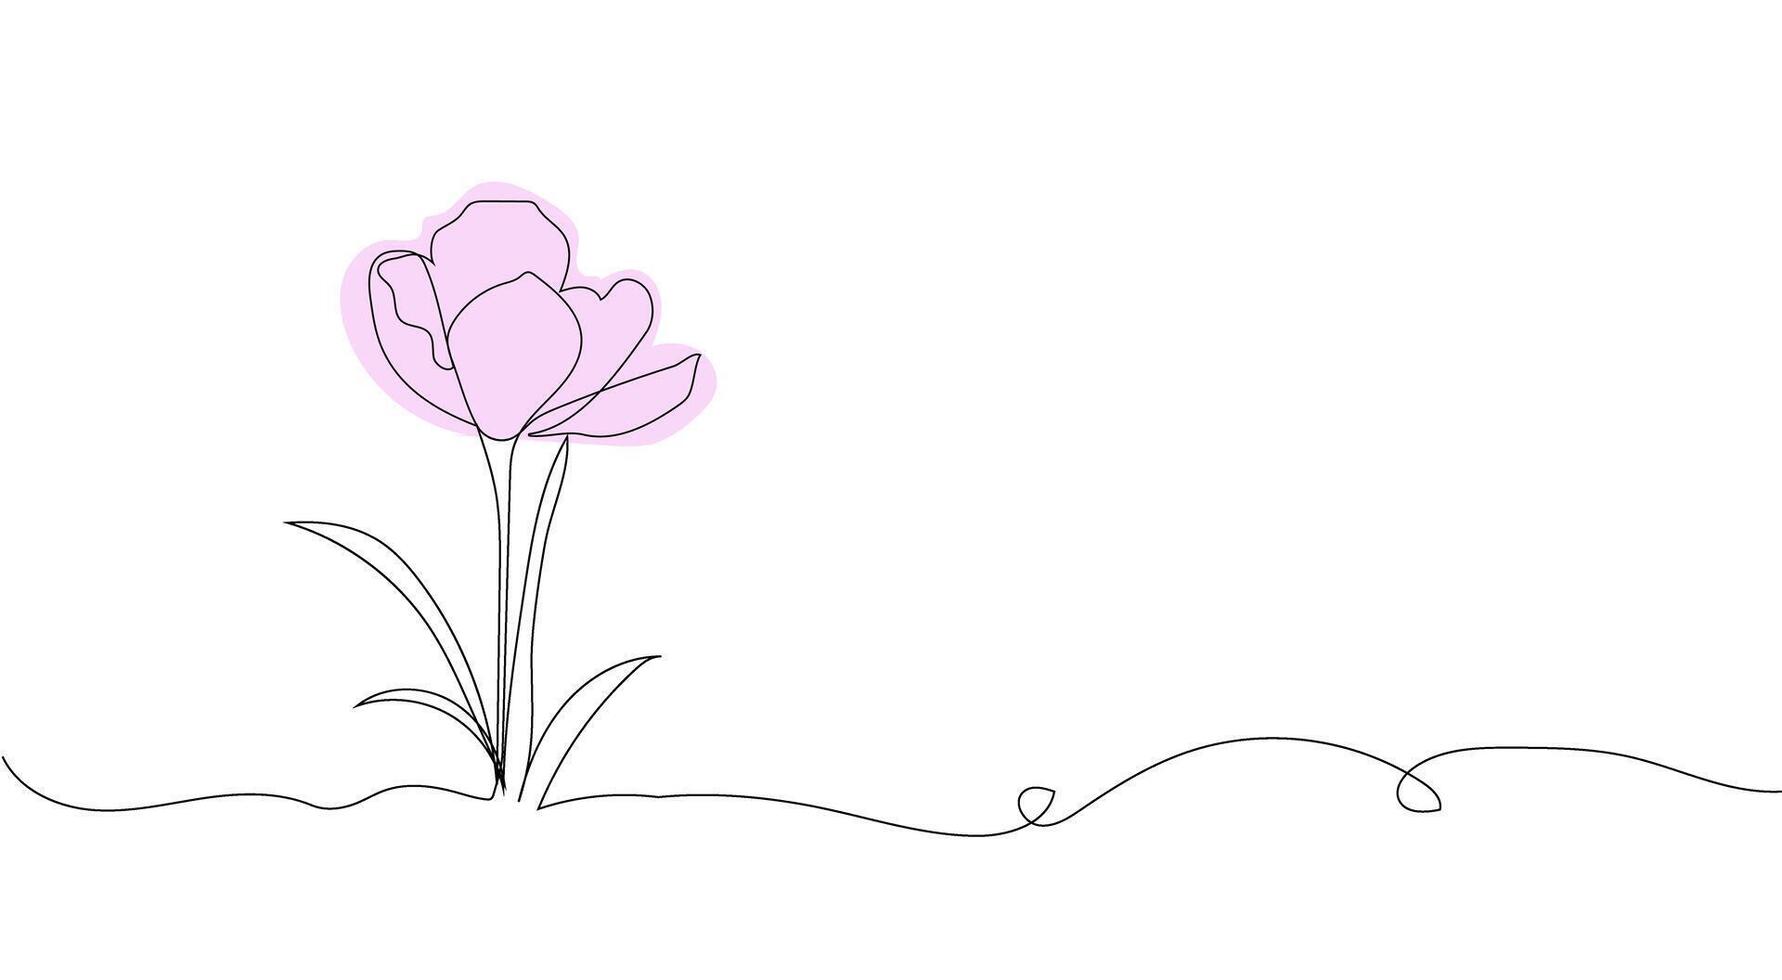 saffron flower line art. Hand drawing. For background, card, invitation, print and other design vector